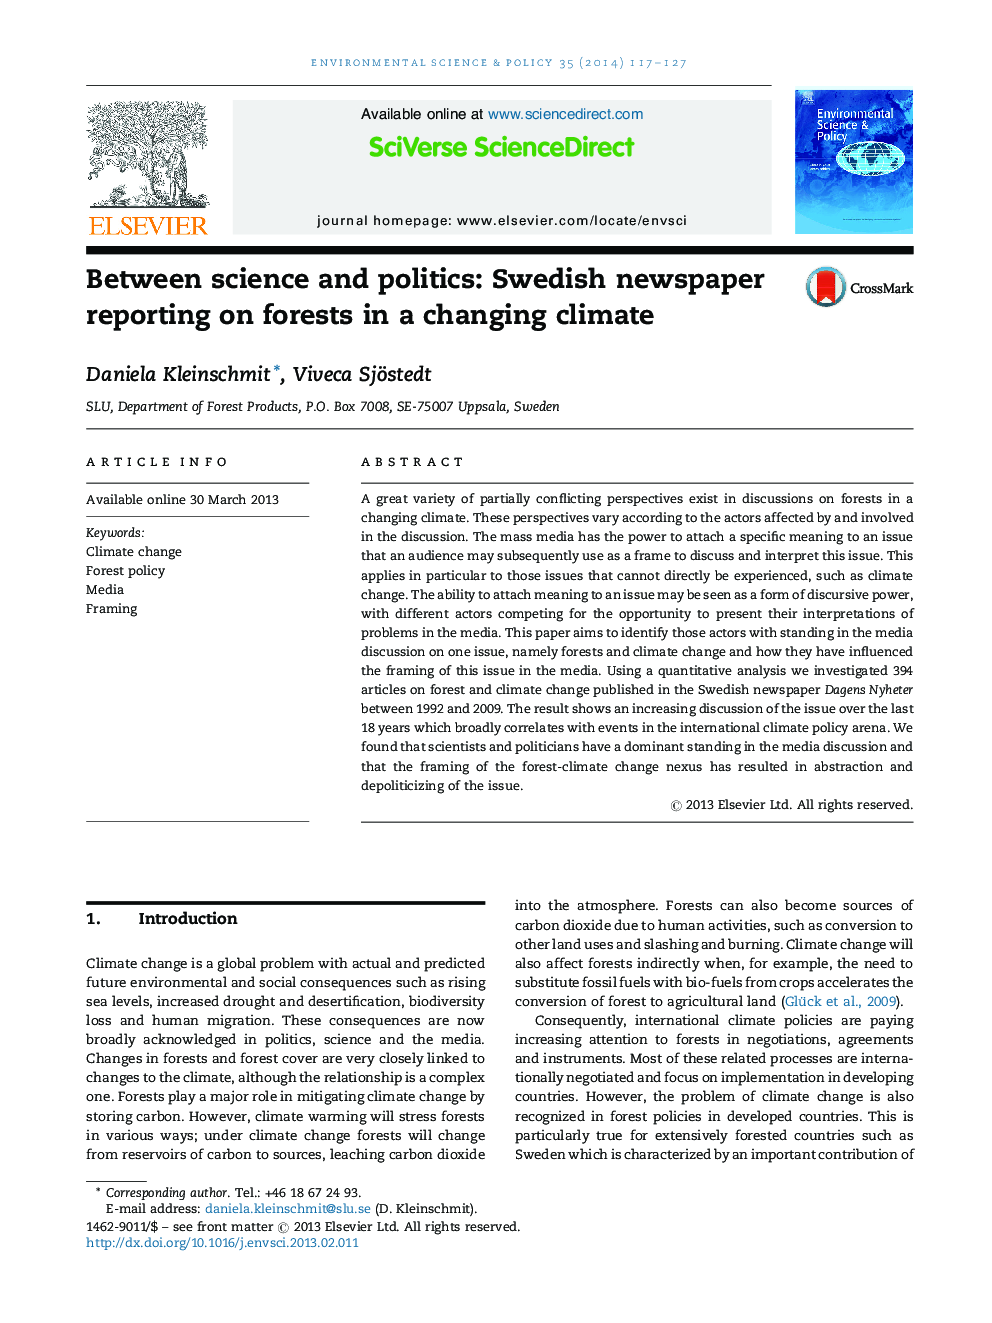 Between science and politics: Swedish newspaper reporting on forests in a changing climate